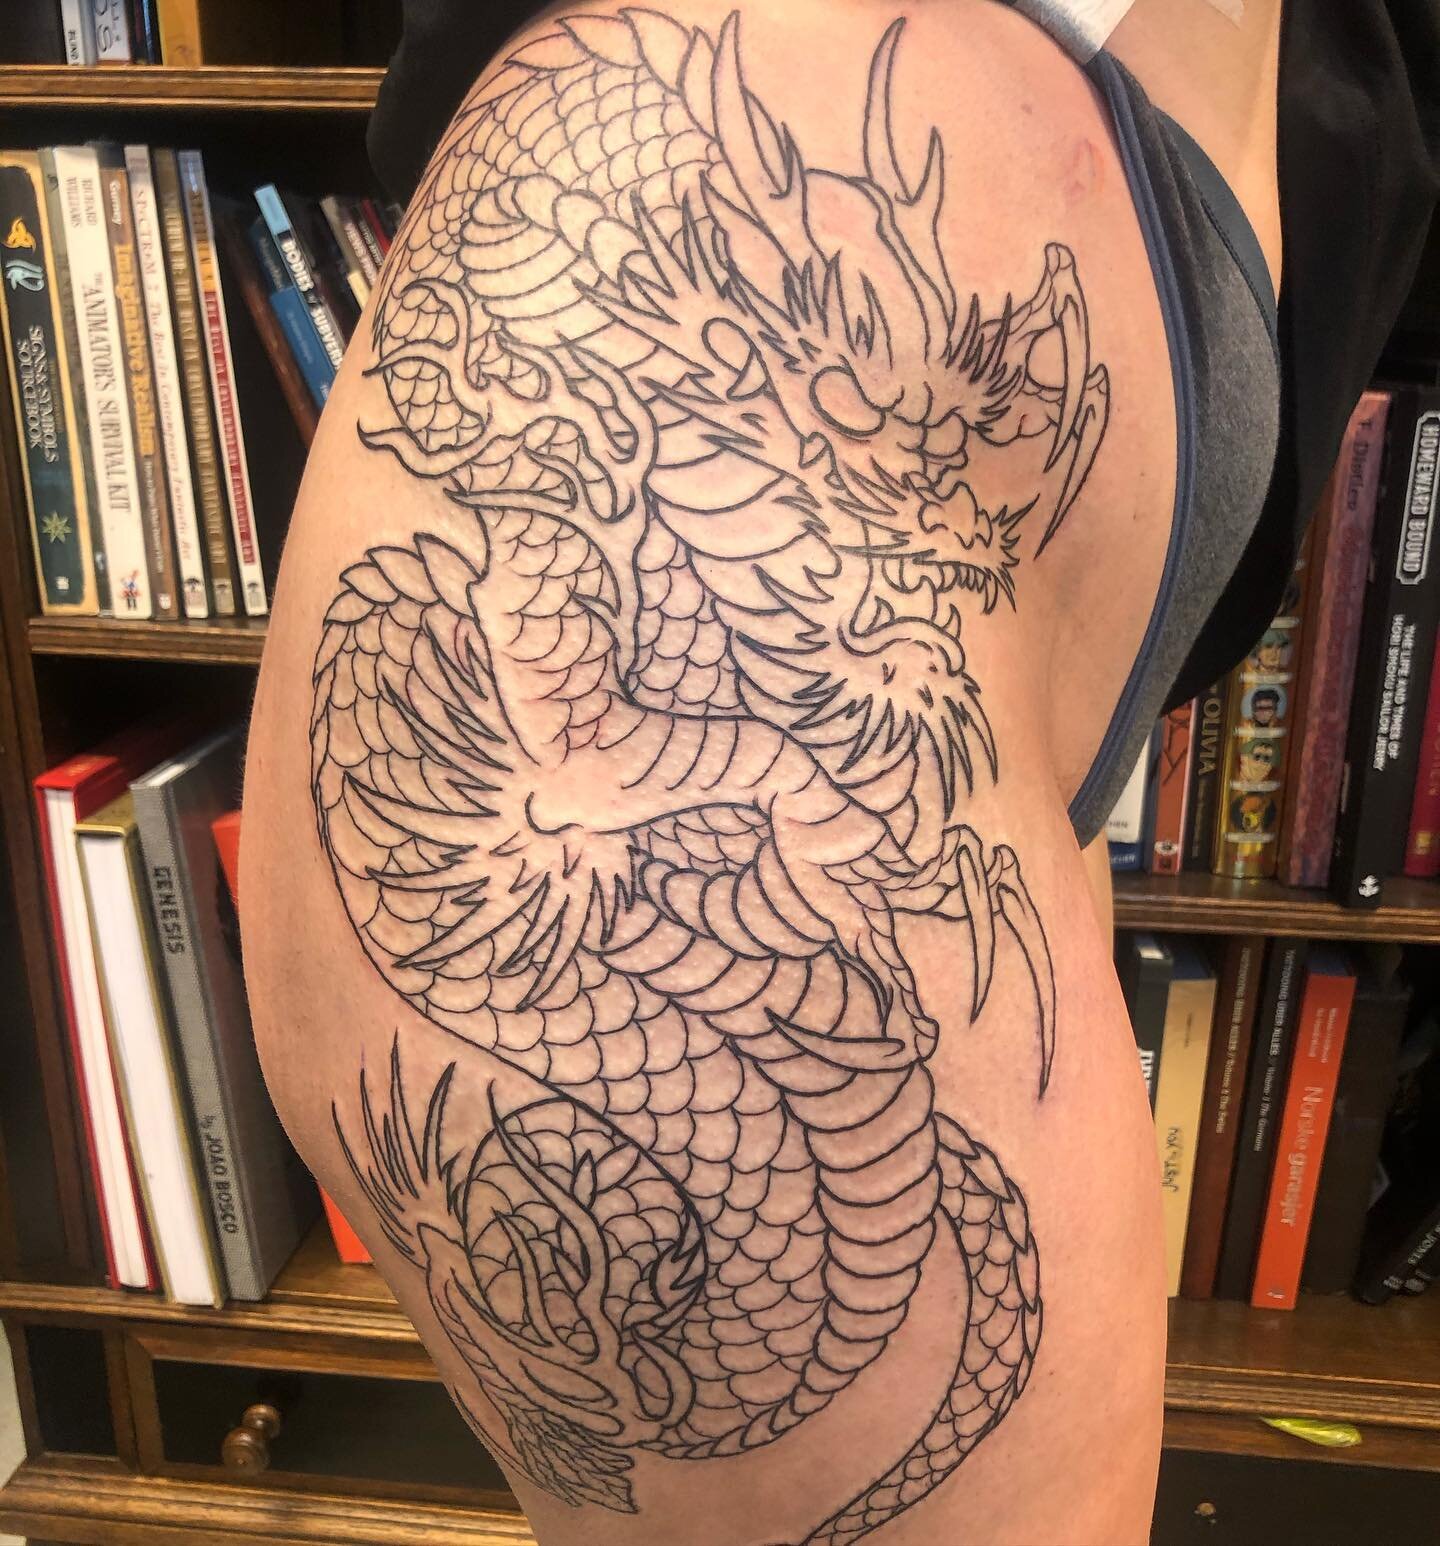 Really enjoying doing these dragons lately, so if you&rsquo;re interested in getting one, I&rsquo;m here to help

#Letsbuzz #letsbuzztattoo #letsbuzzbergen #bergen #tattoo #tatovering #dragontattoo #japanesetattoo